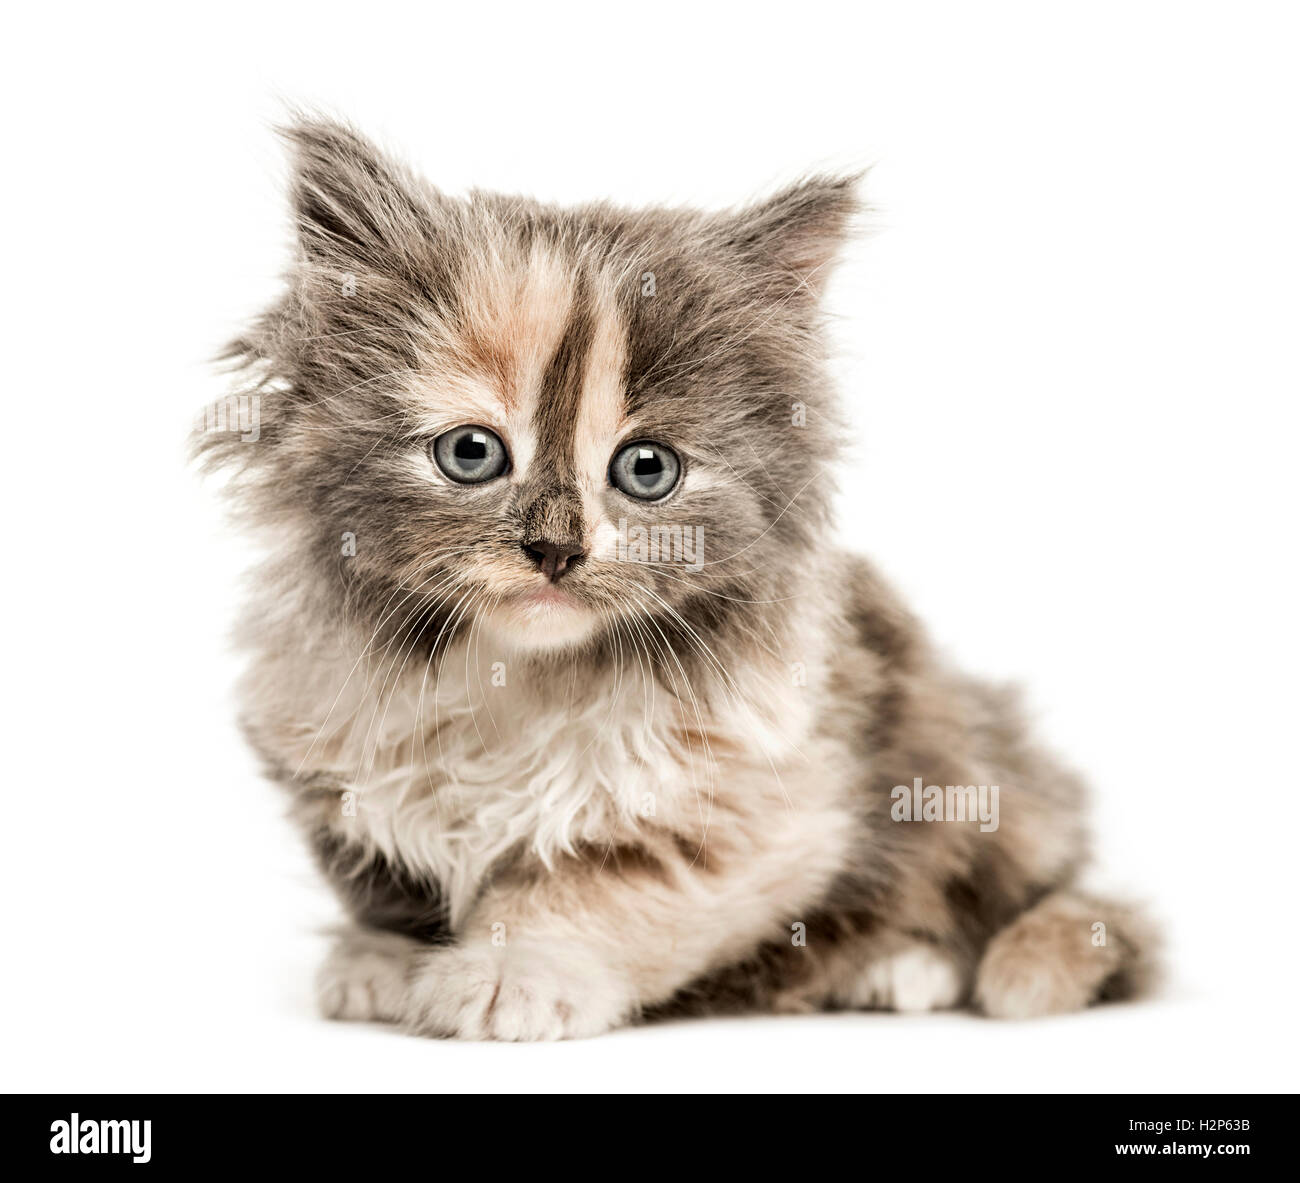 European Shorthair kitten, 1 month old, lying down looking at camera, isolated on white Stock Photo